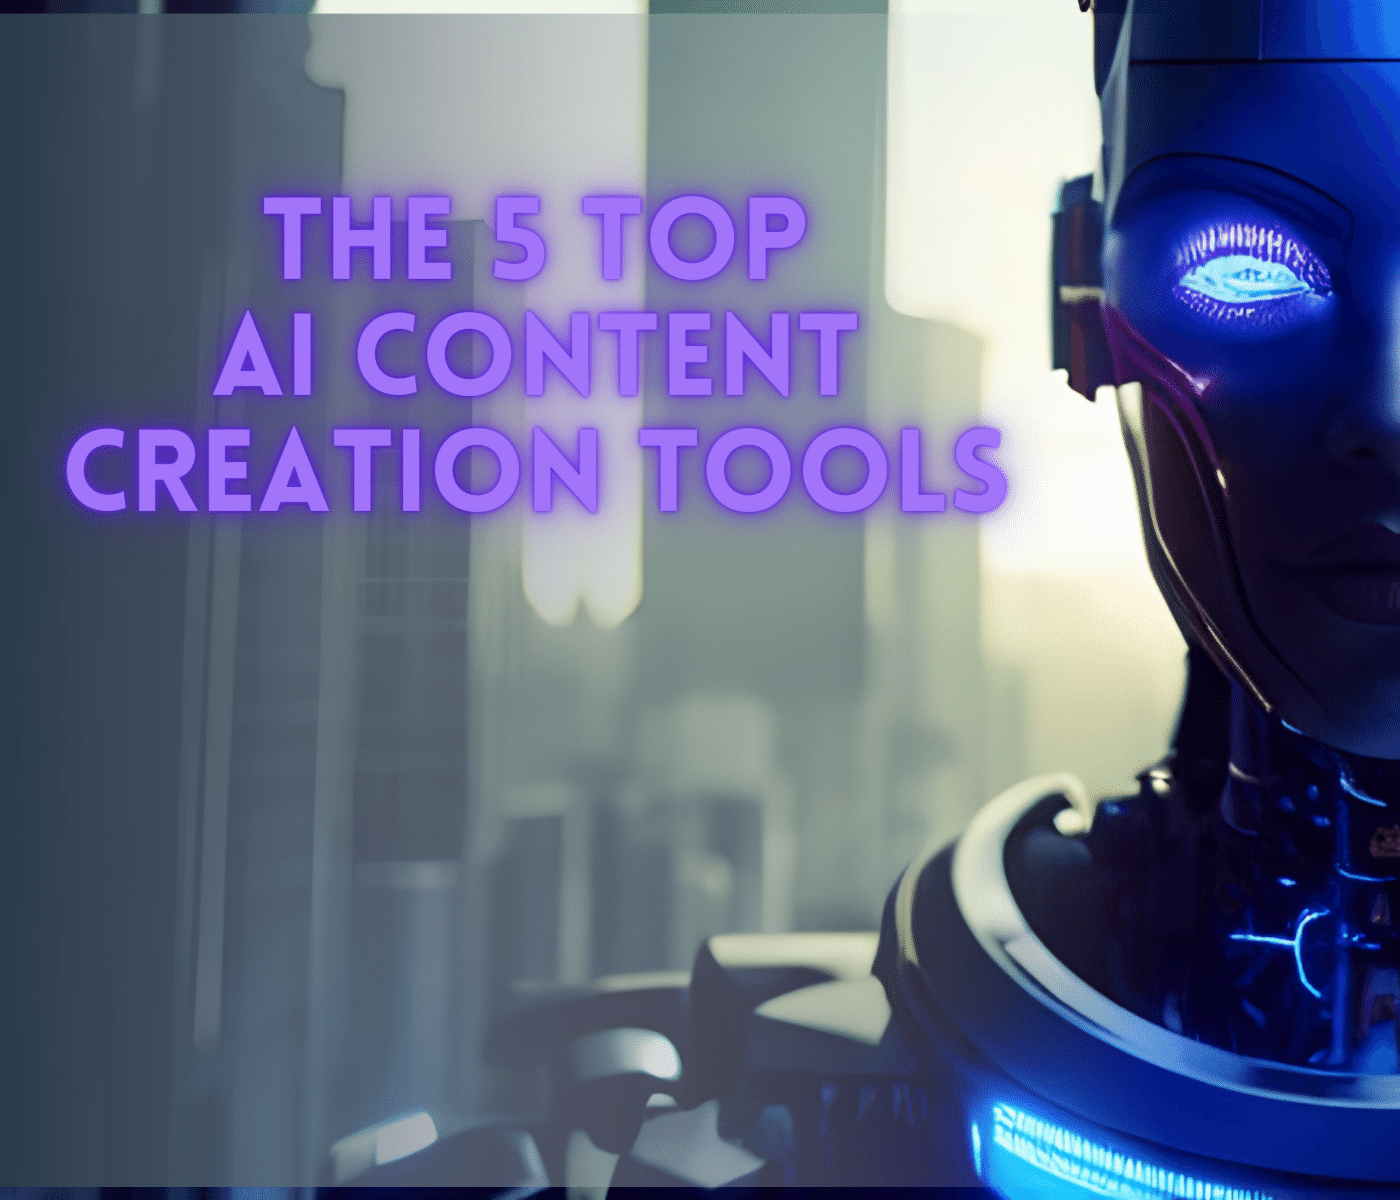 The 5 Top AI content creation tools